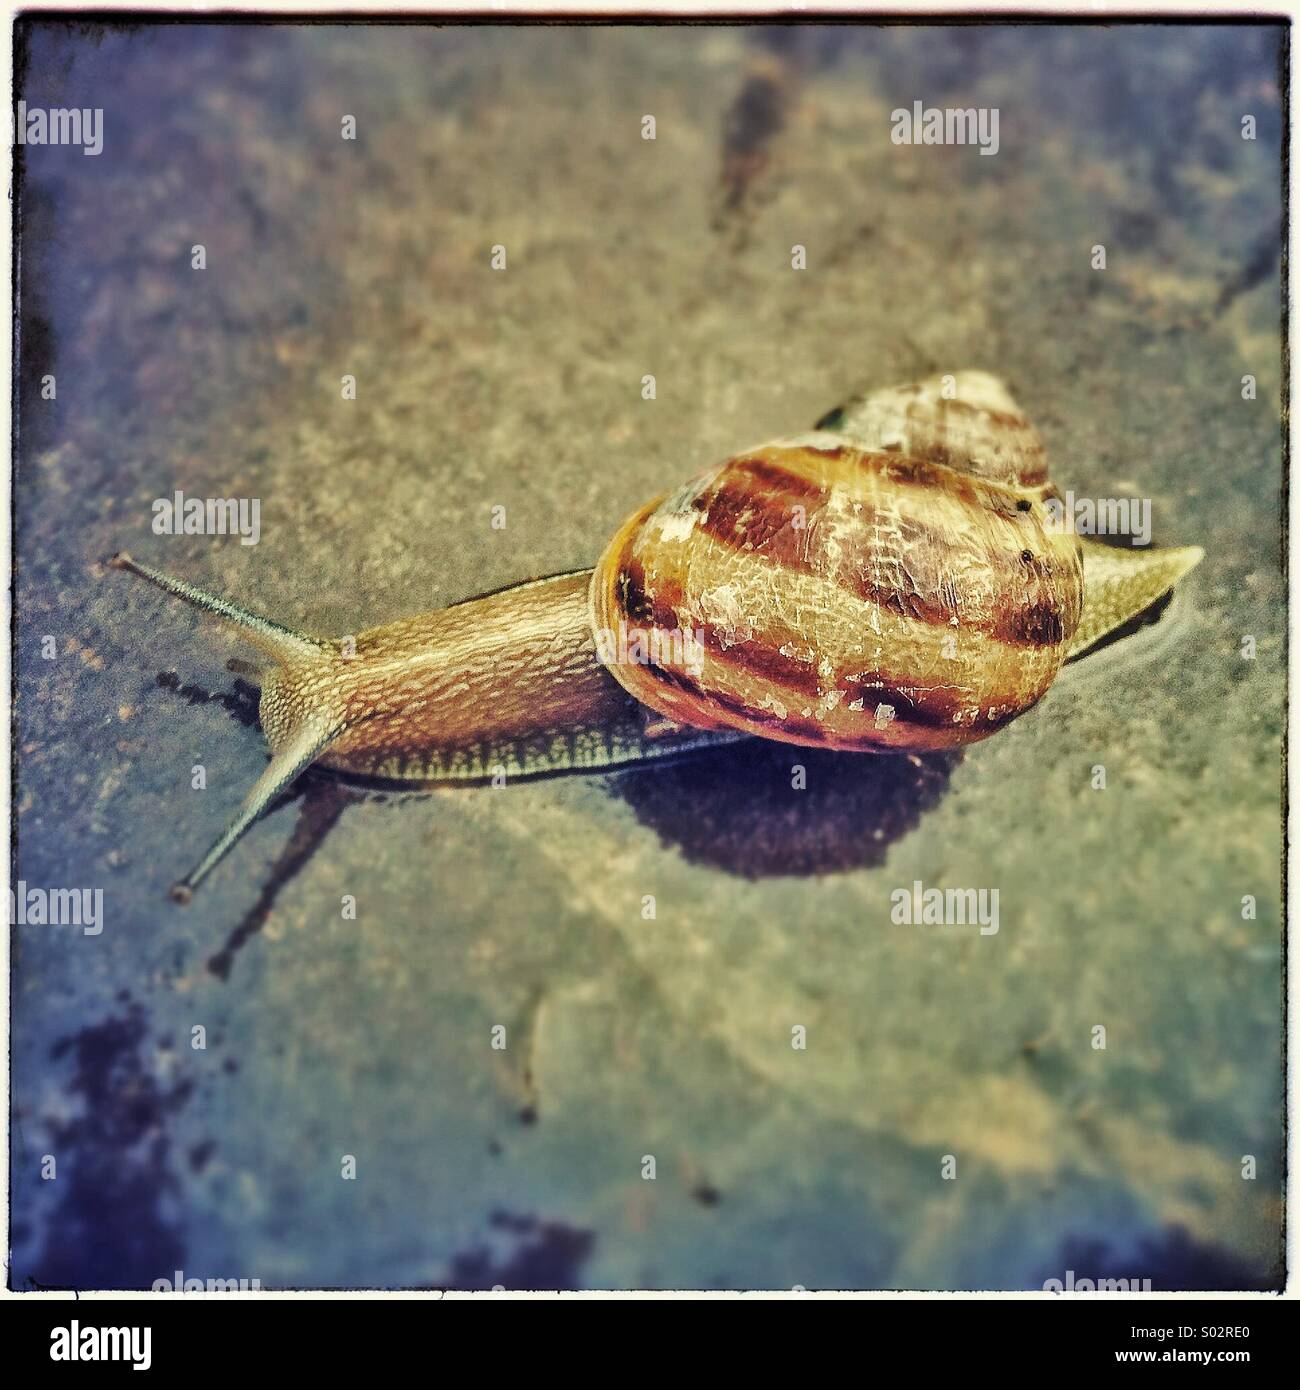 Snail on the road Stock Photo